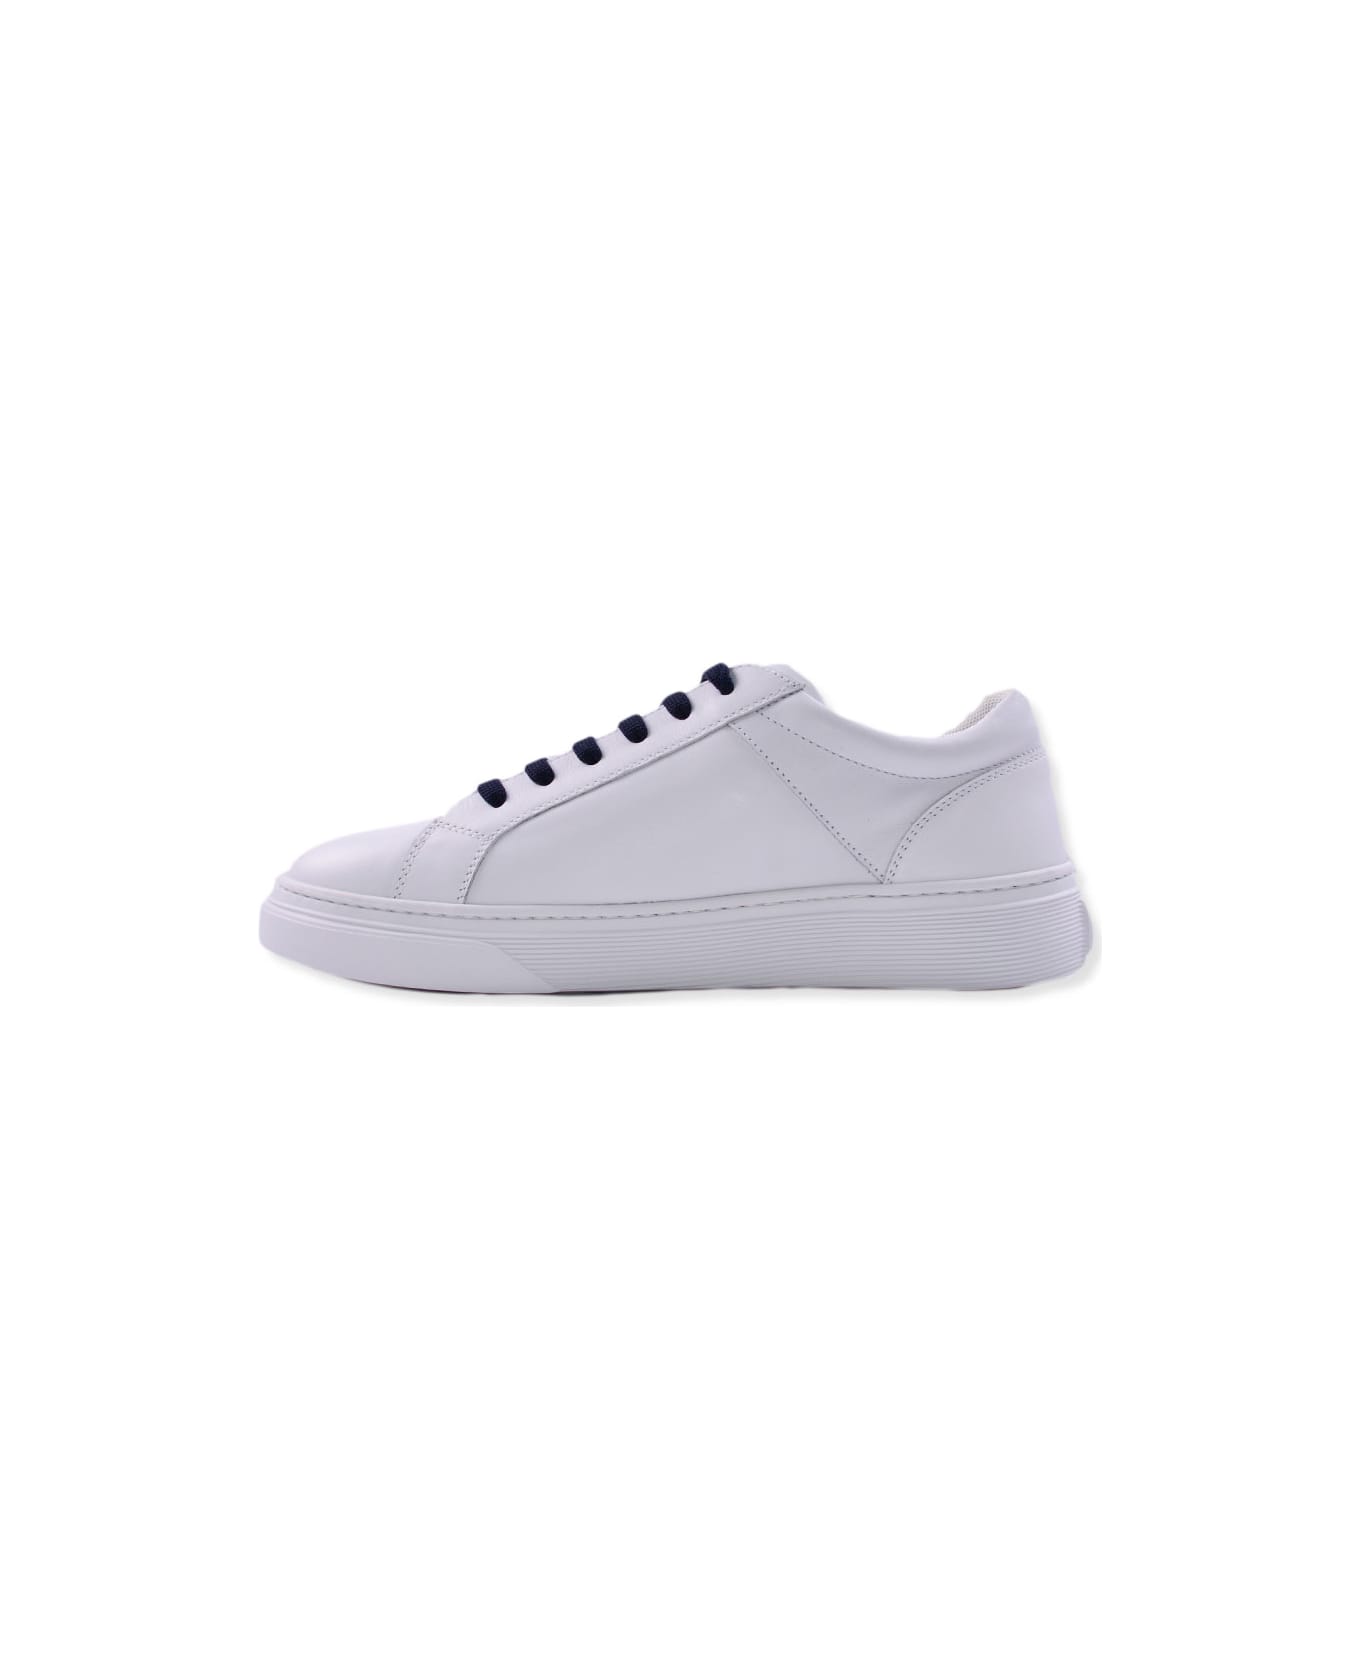 Hogan R365 Sneakers In Leather - White